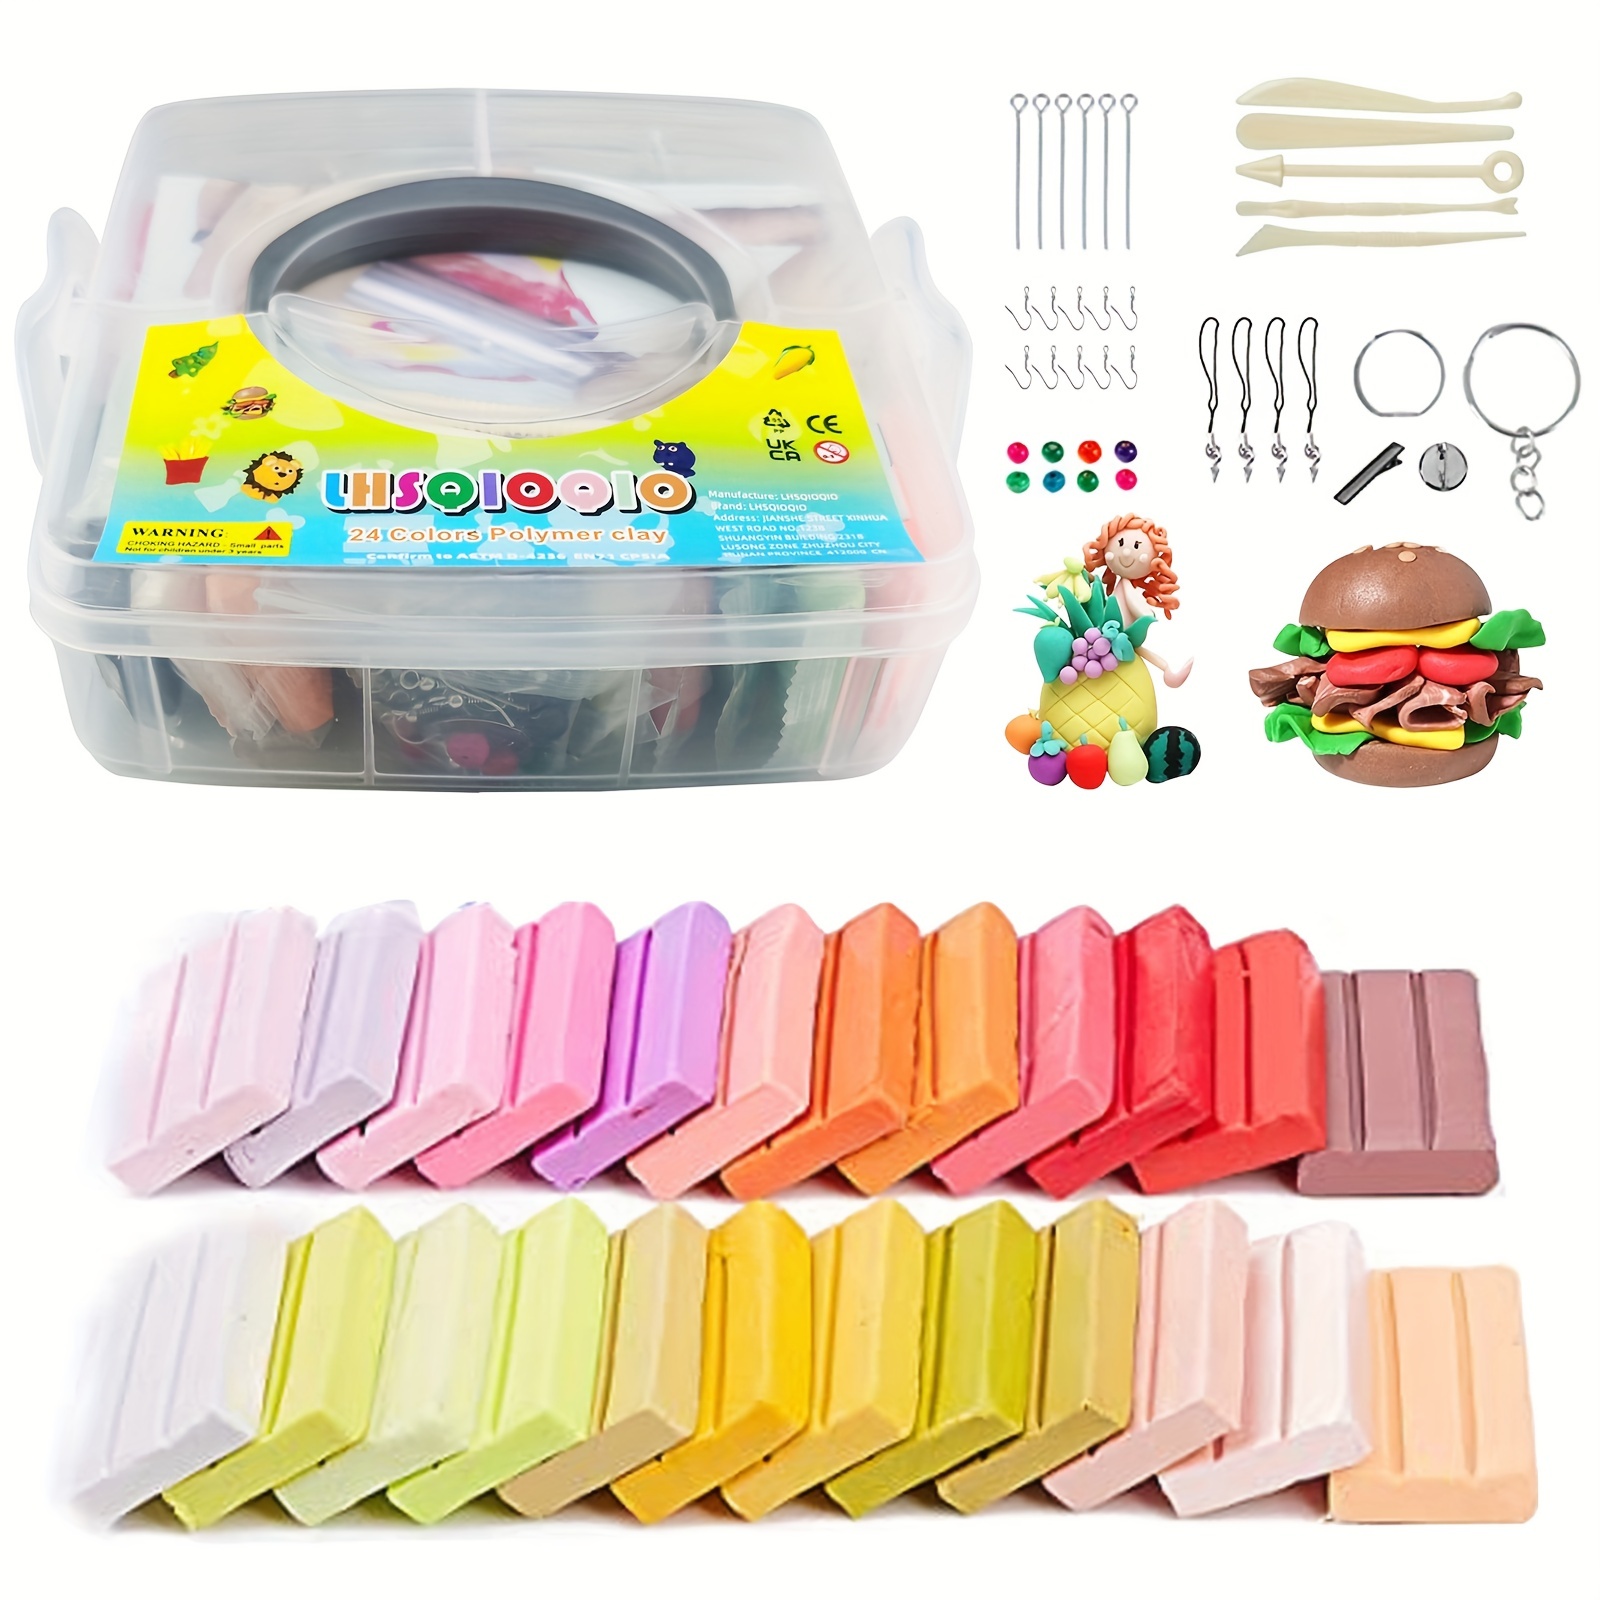 Buy Polymer Clay Kit, Oven Bake Modeling Clay for Adults and Kids, Polymer  Clay Starter Kit, Modeling Clay Set, Non-Toxic DIY Modeling Clay Assorted  with Sculpting Tools. Great for Kids, Beginners, Artists